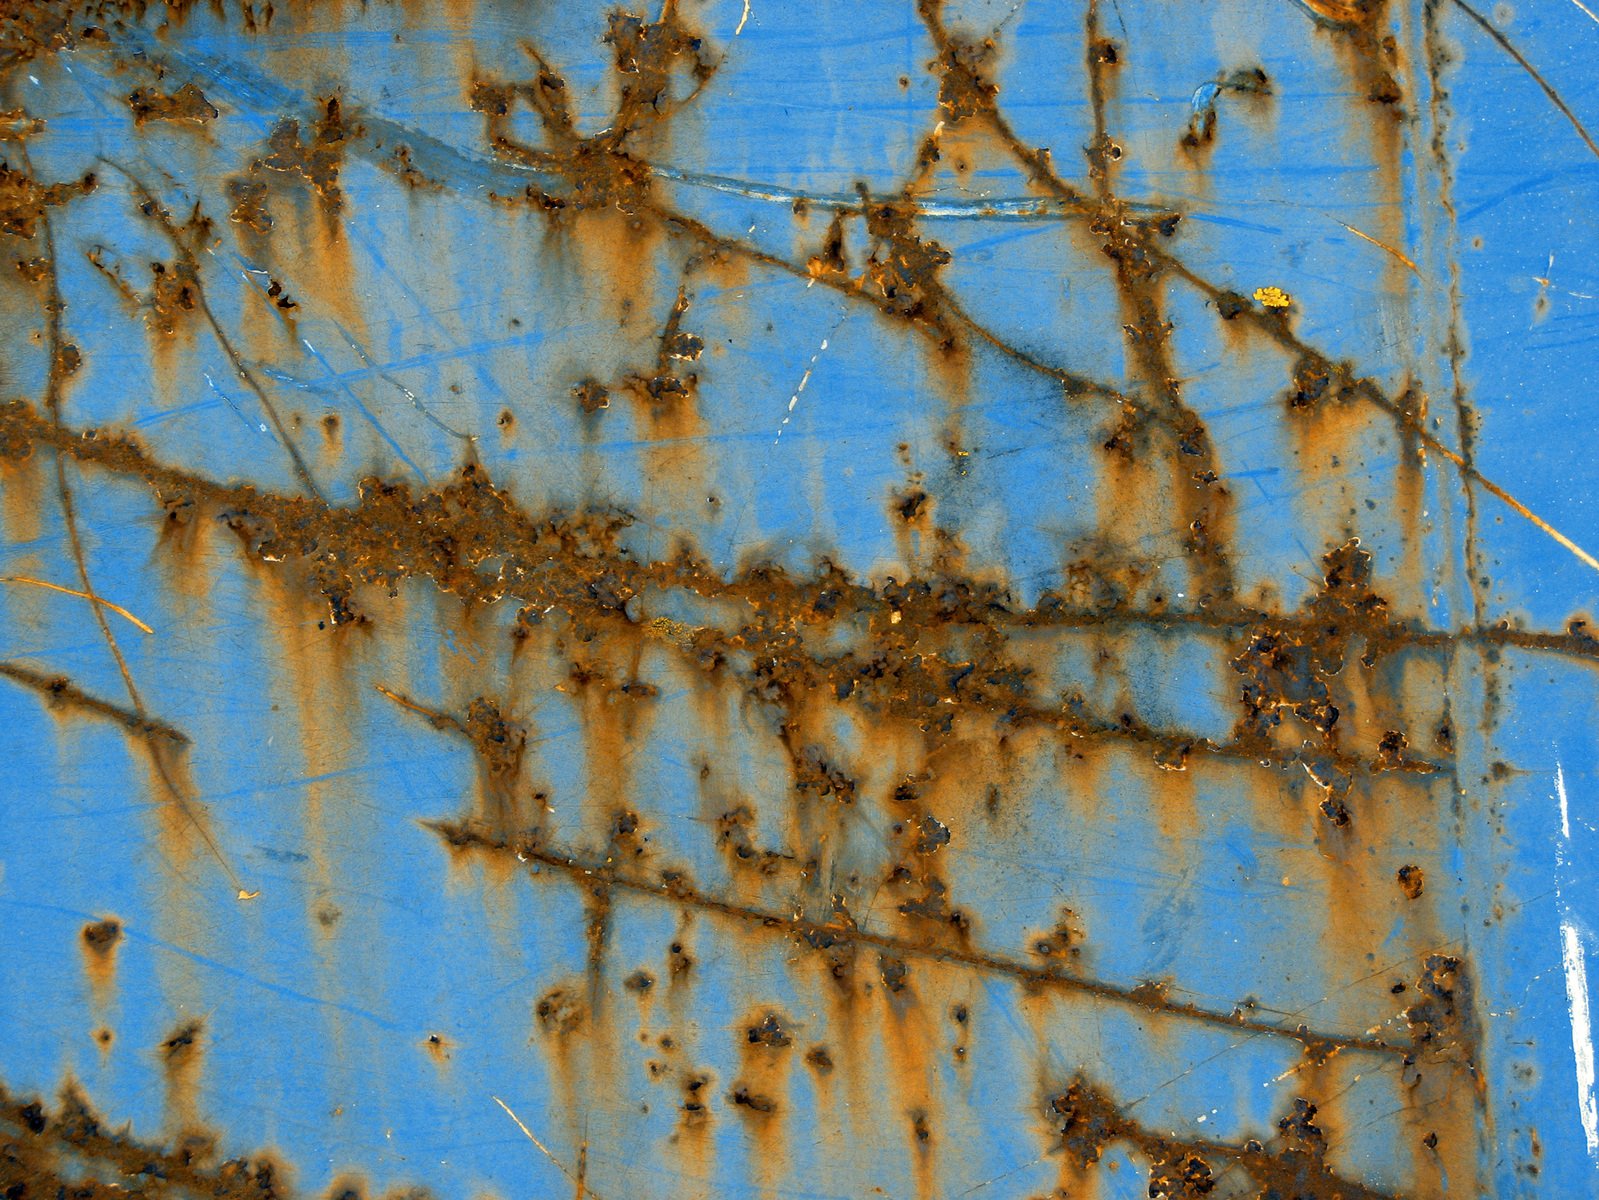 rusty blue surface that looks to have been covered with brown algae